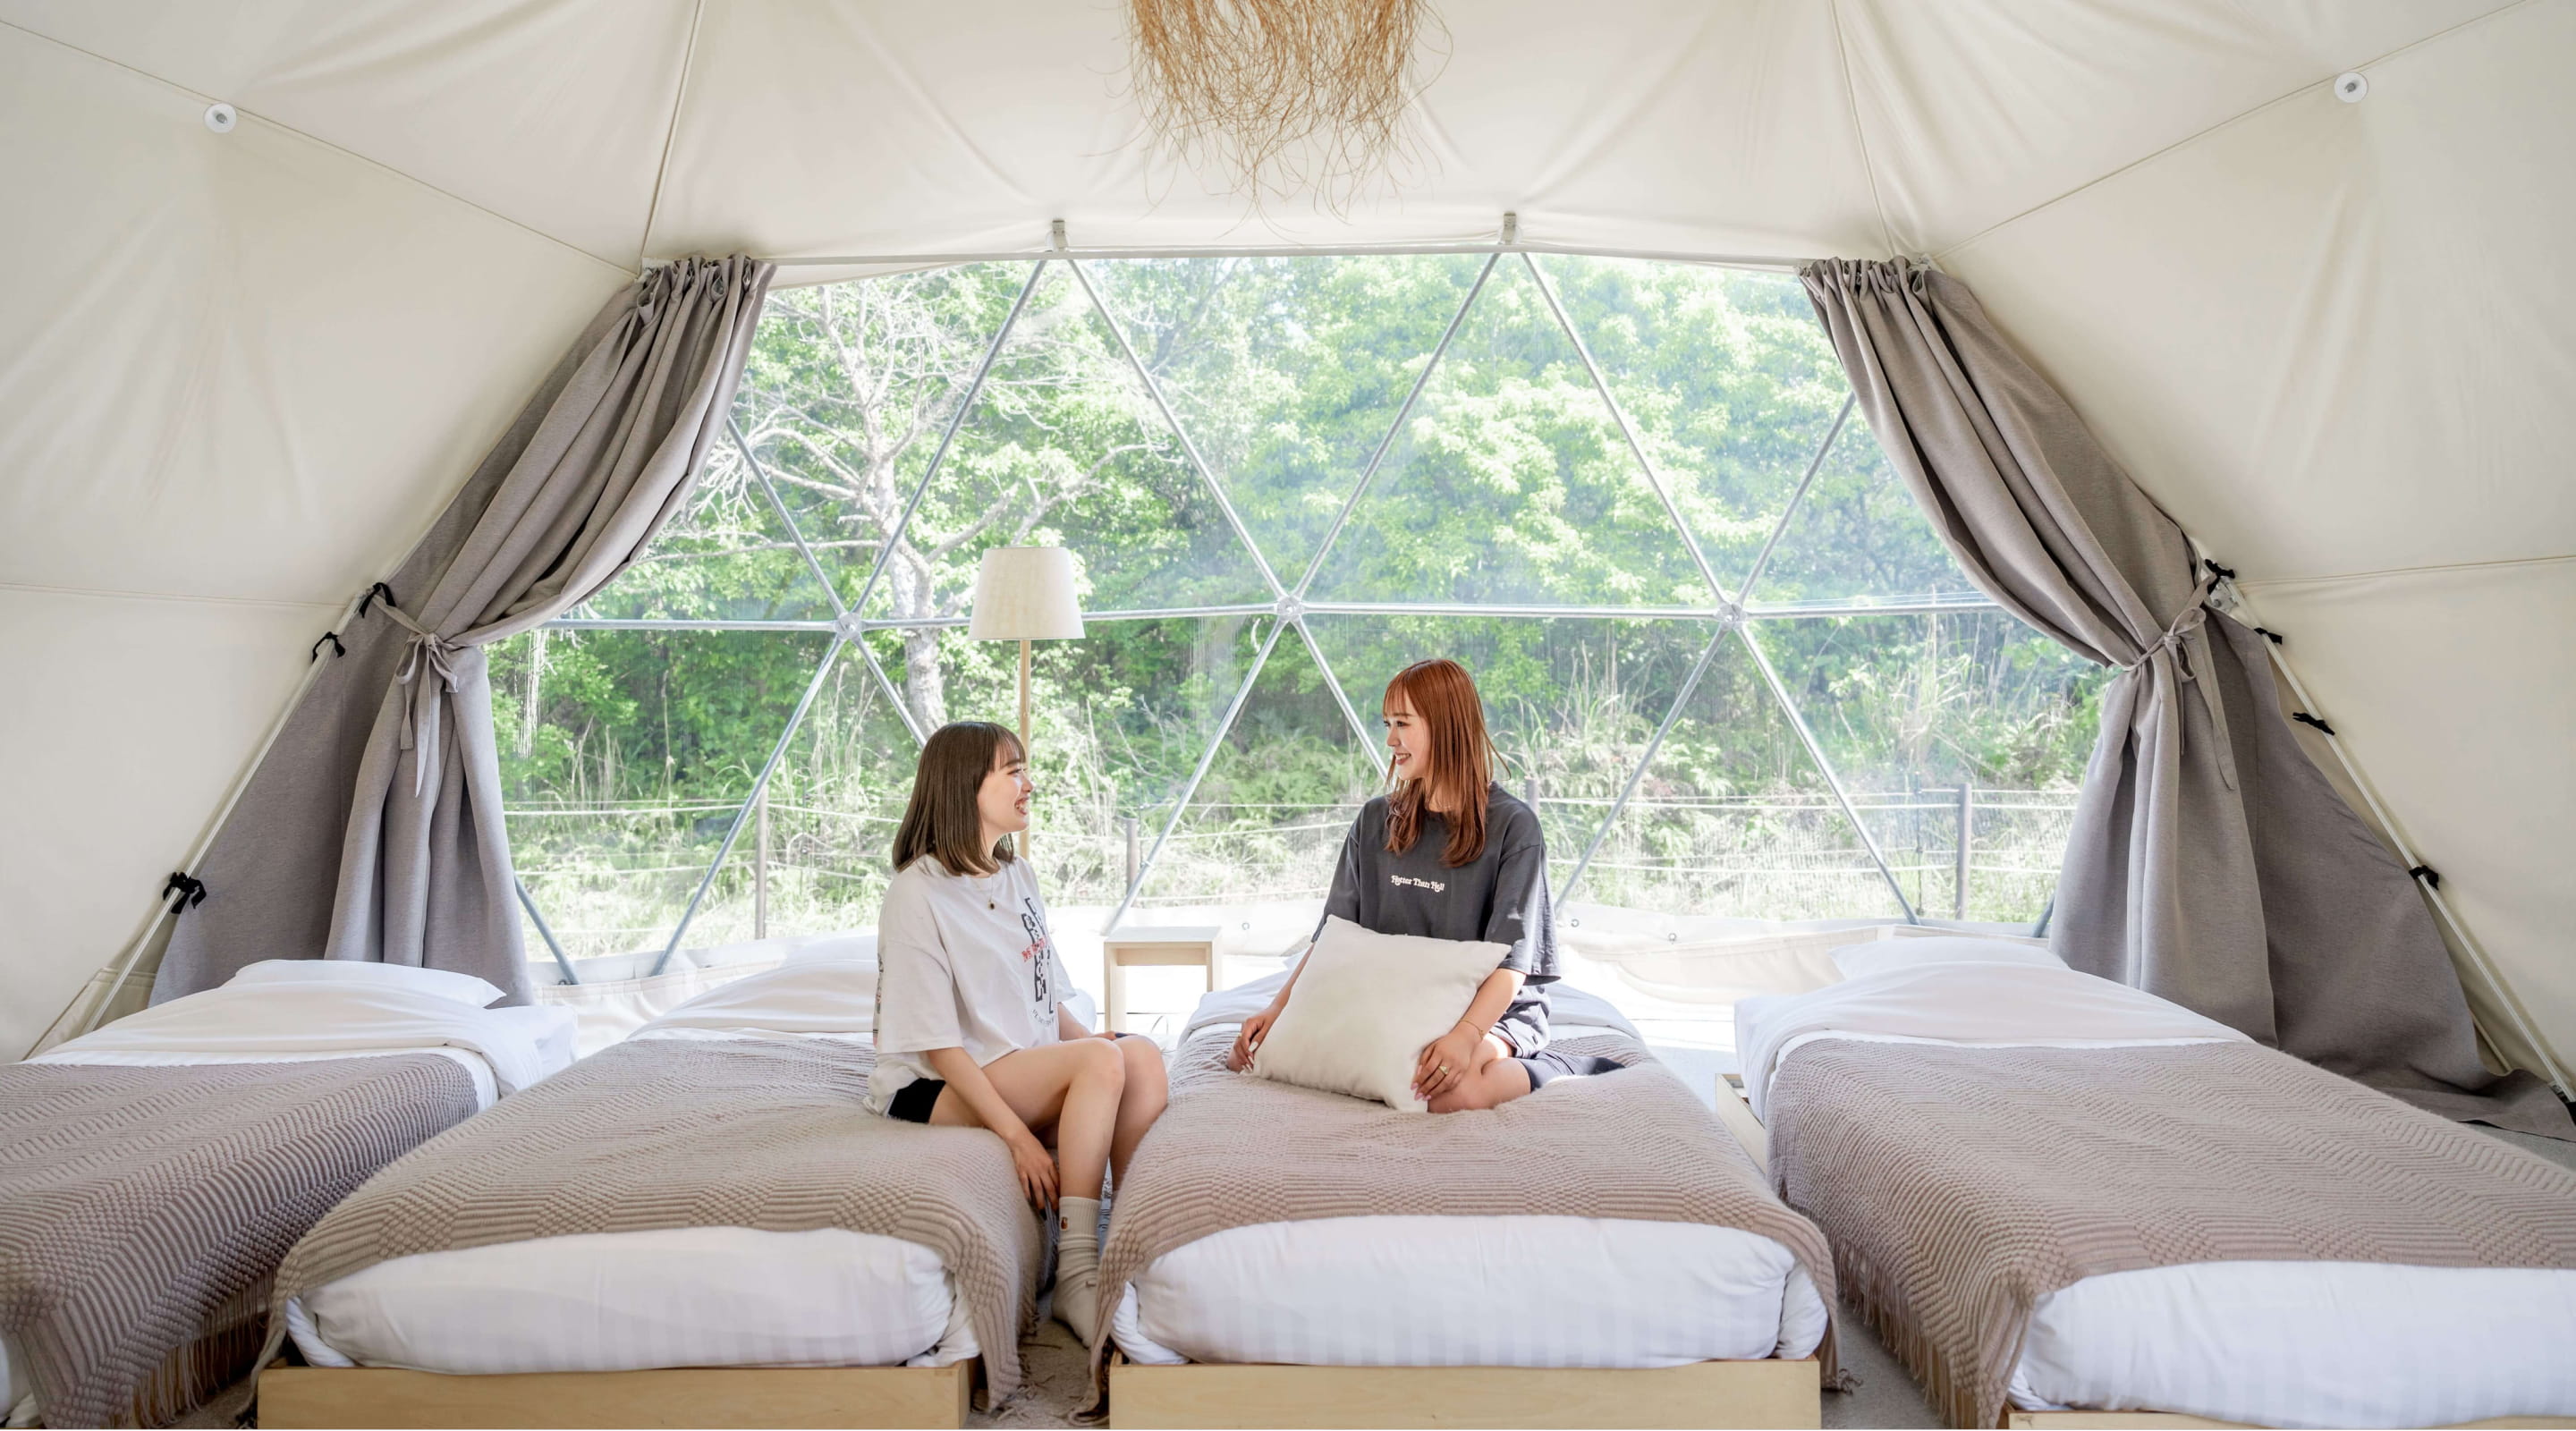 Photo of women relaxing on beds in a tent